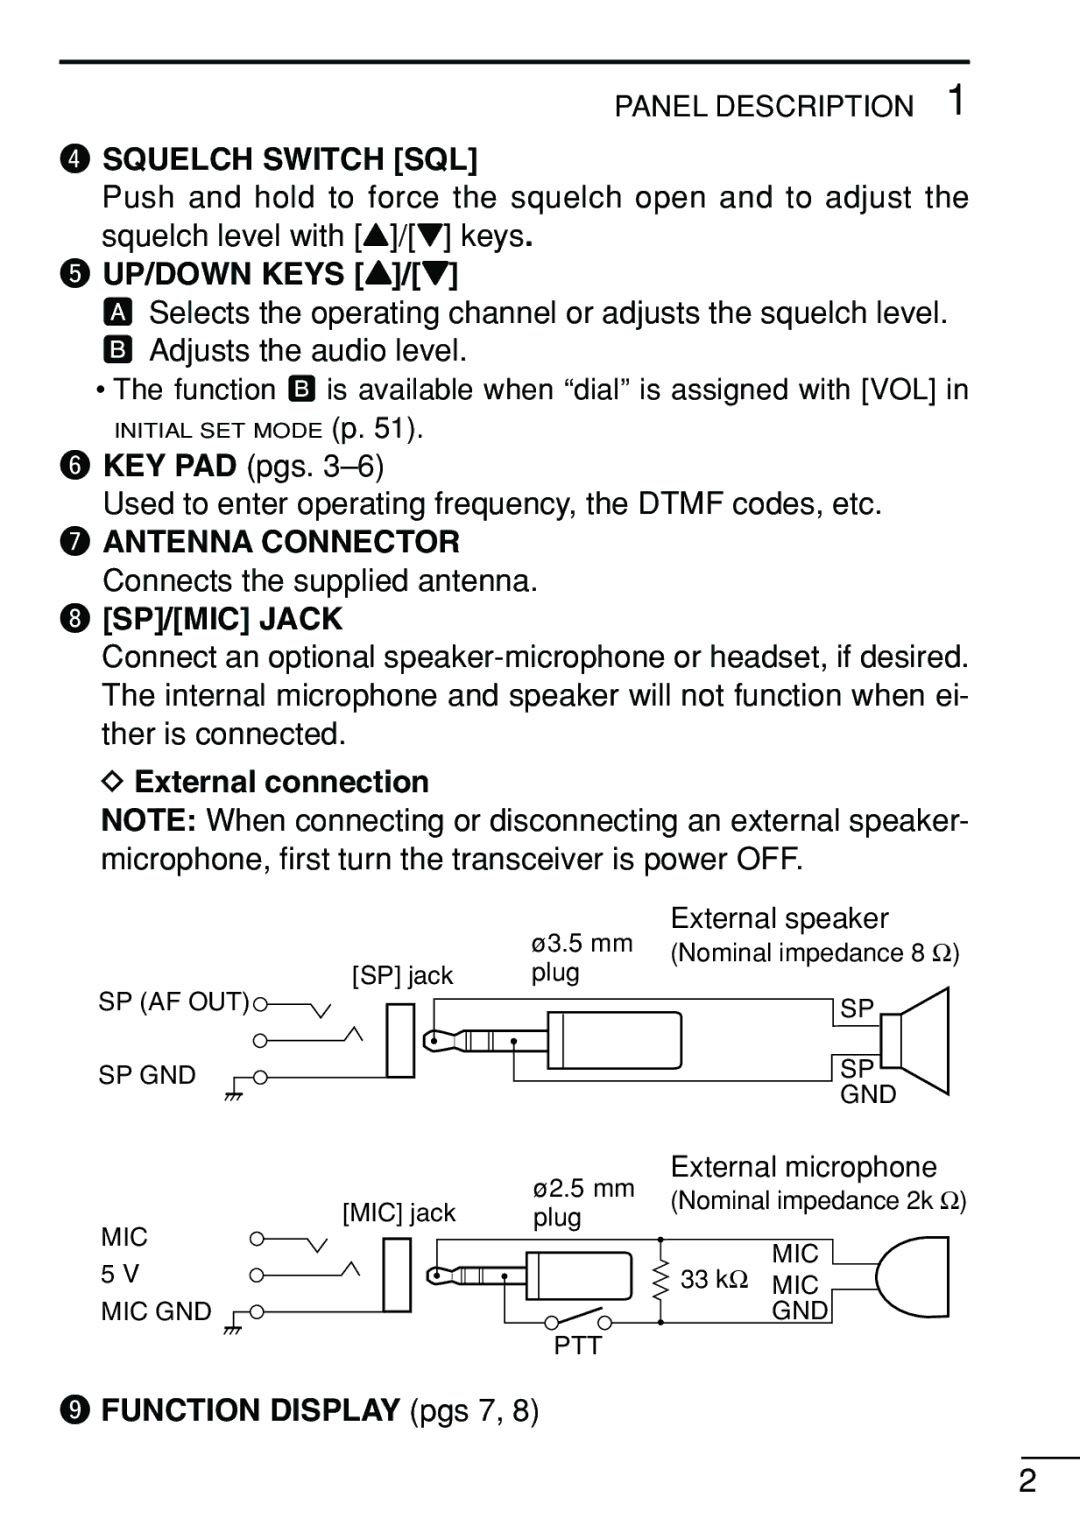 Icom IC-V8 instruction manual Squelch Switch SQL, UP/DOWN Keys Y/Z, Antenna Connector, SP/MIC Jack, External connection 